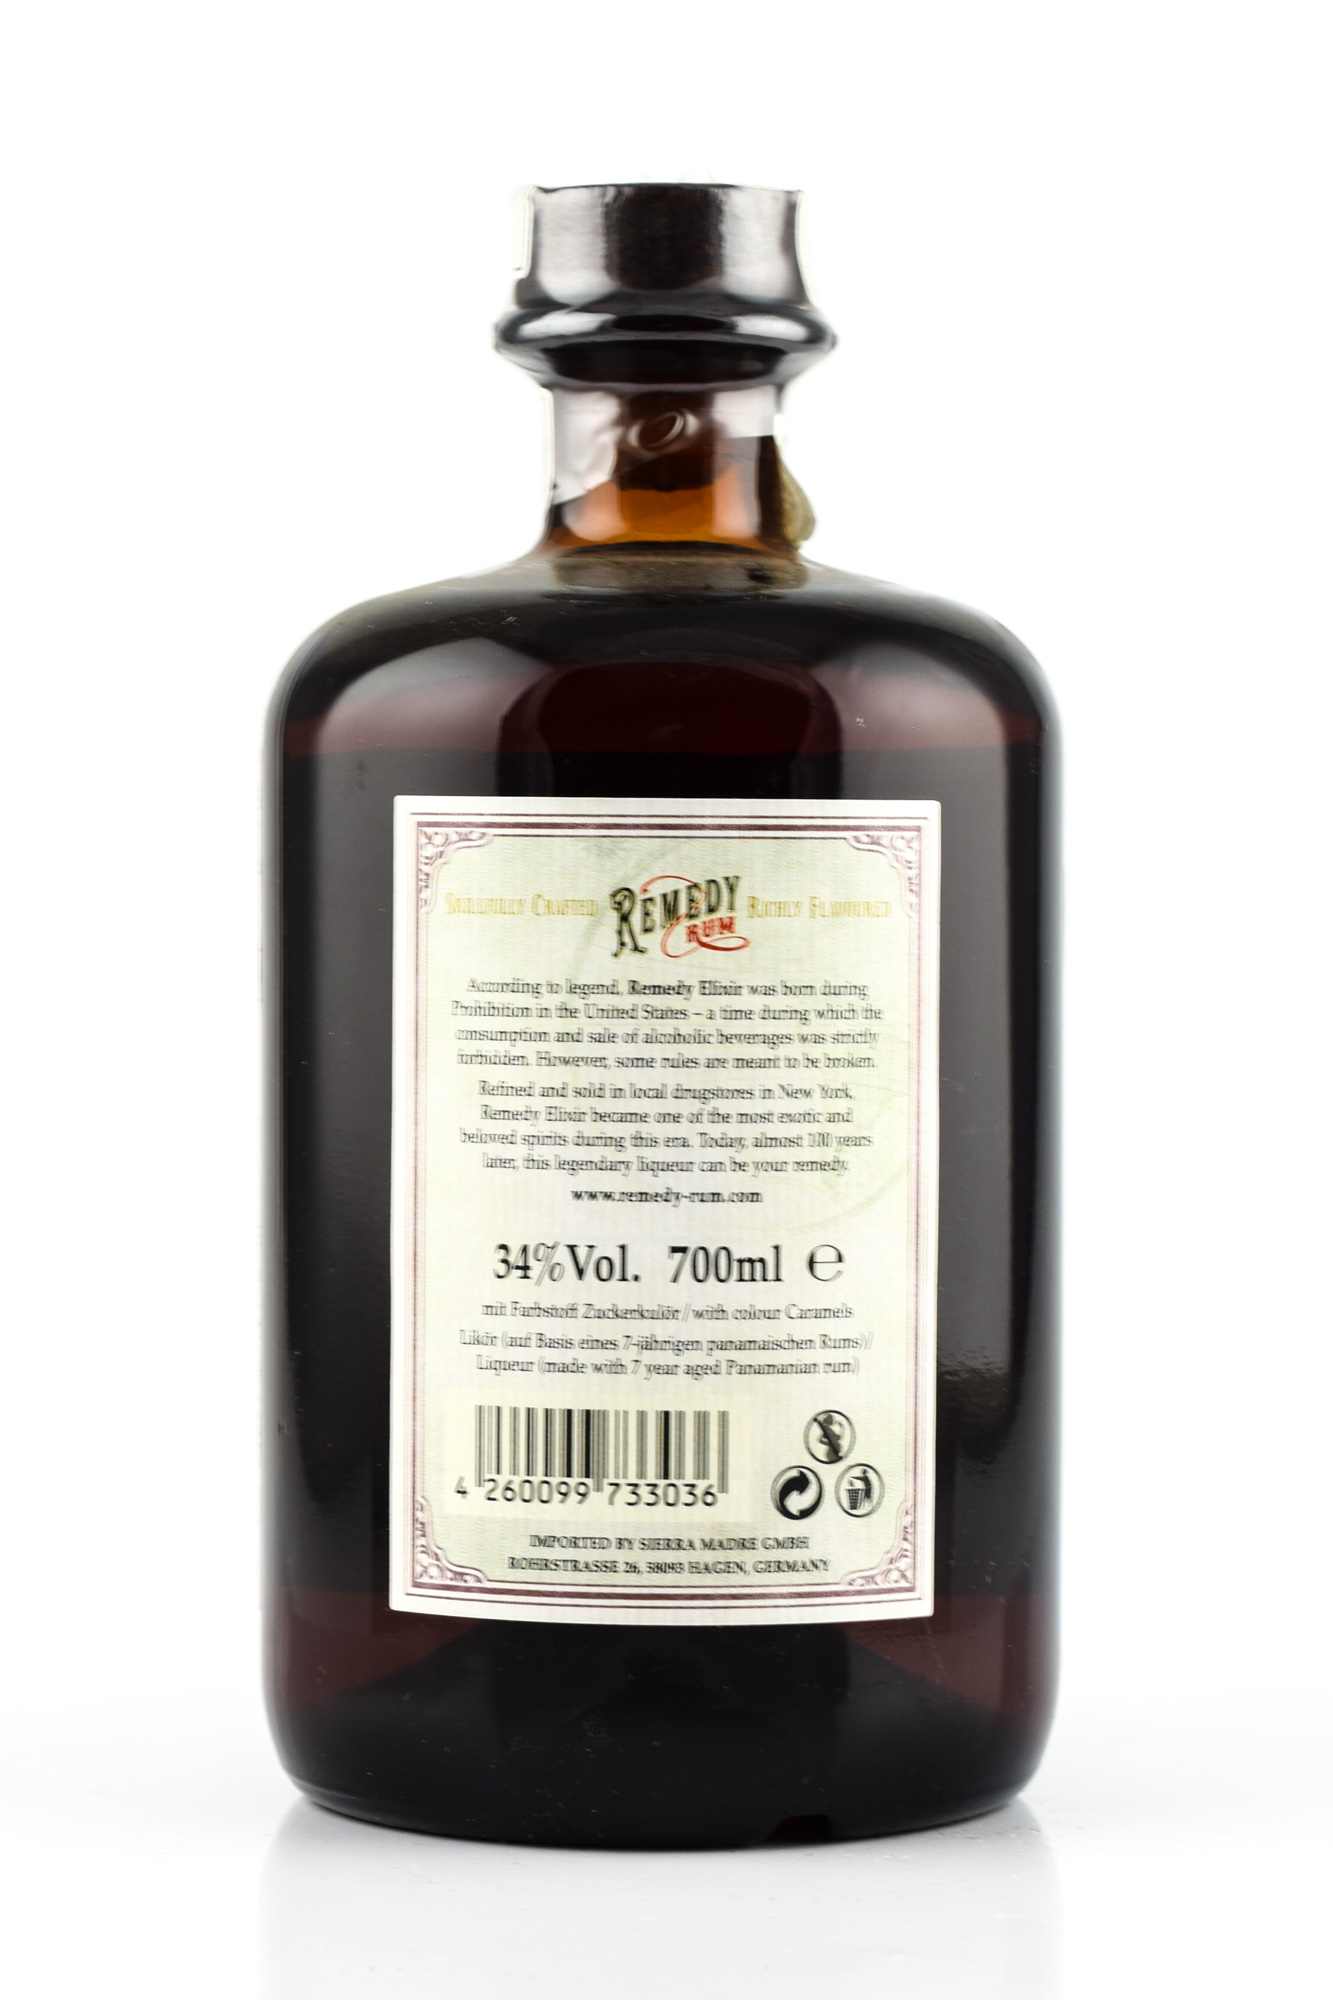 Remedy Elixir now! Home Malts | at >> explore of Malts Home of